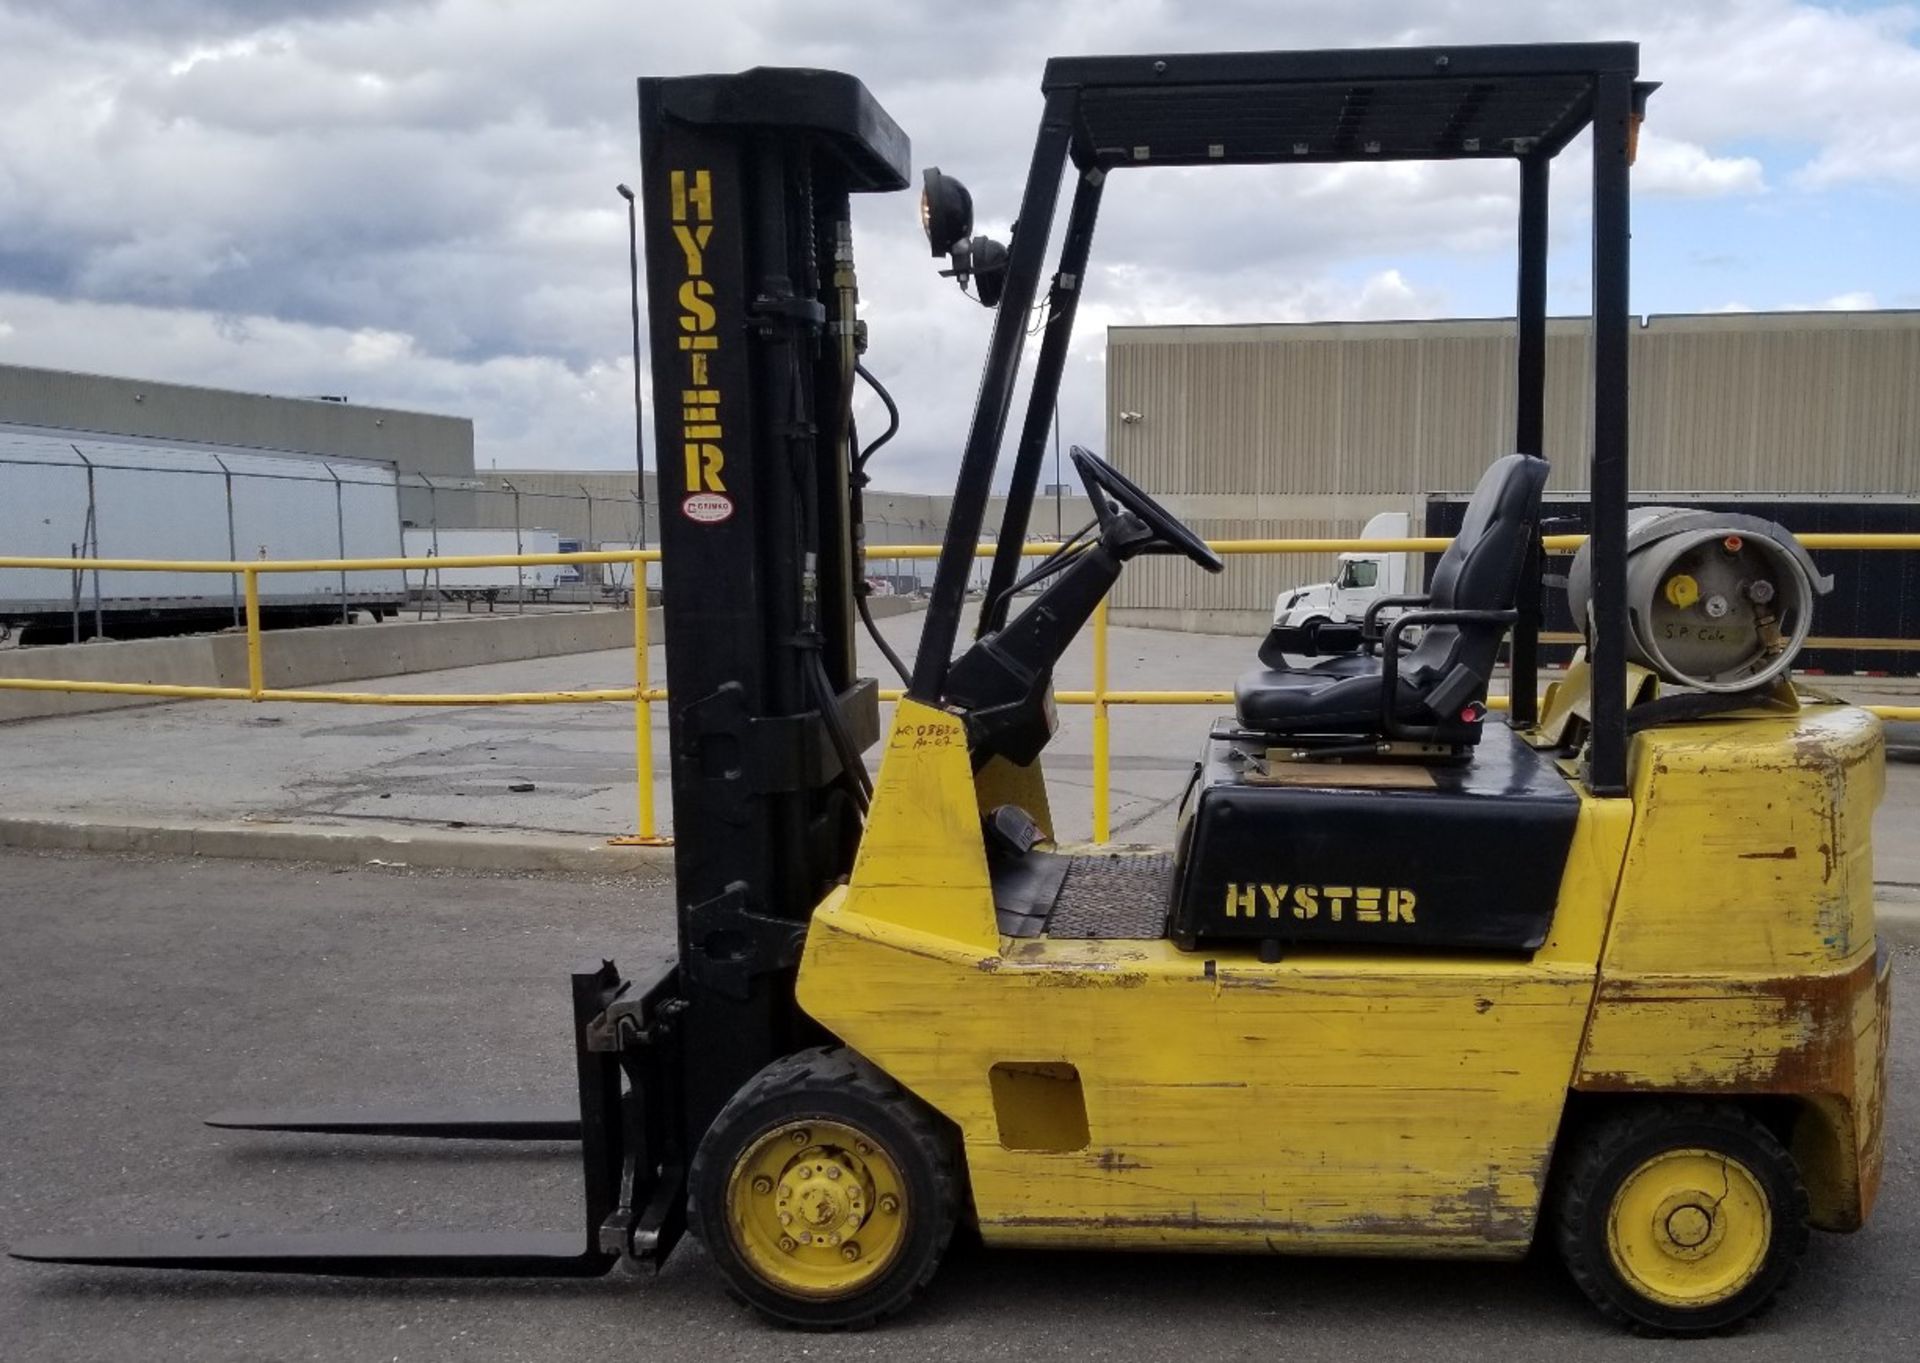 HYSTER (1994) S50XL LPG FORKLIFT WITH 5000 LB. CAPACITY, 189" VERTICAL LIFT, SIDE SHIFT, MULTI-